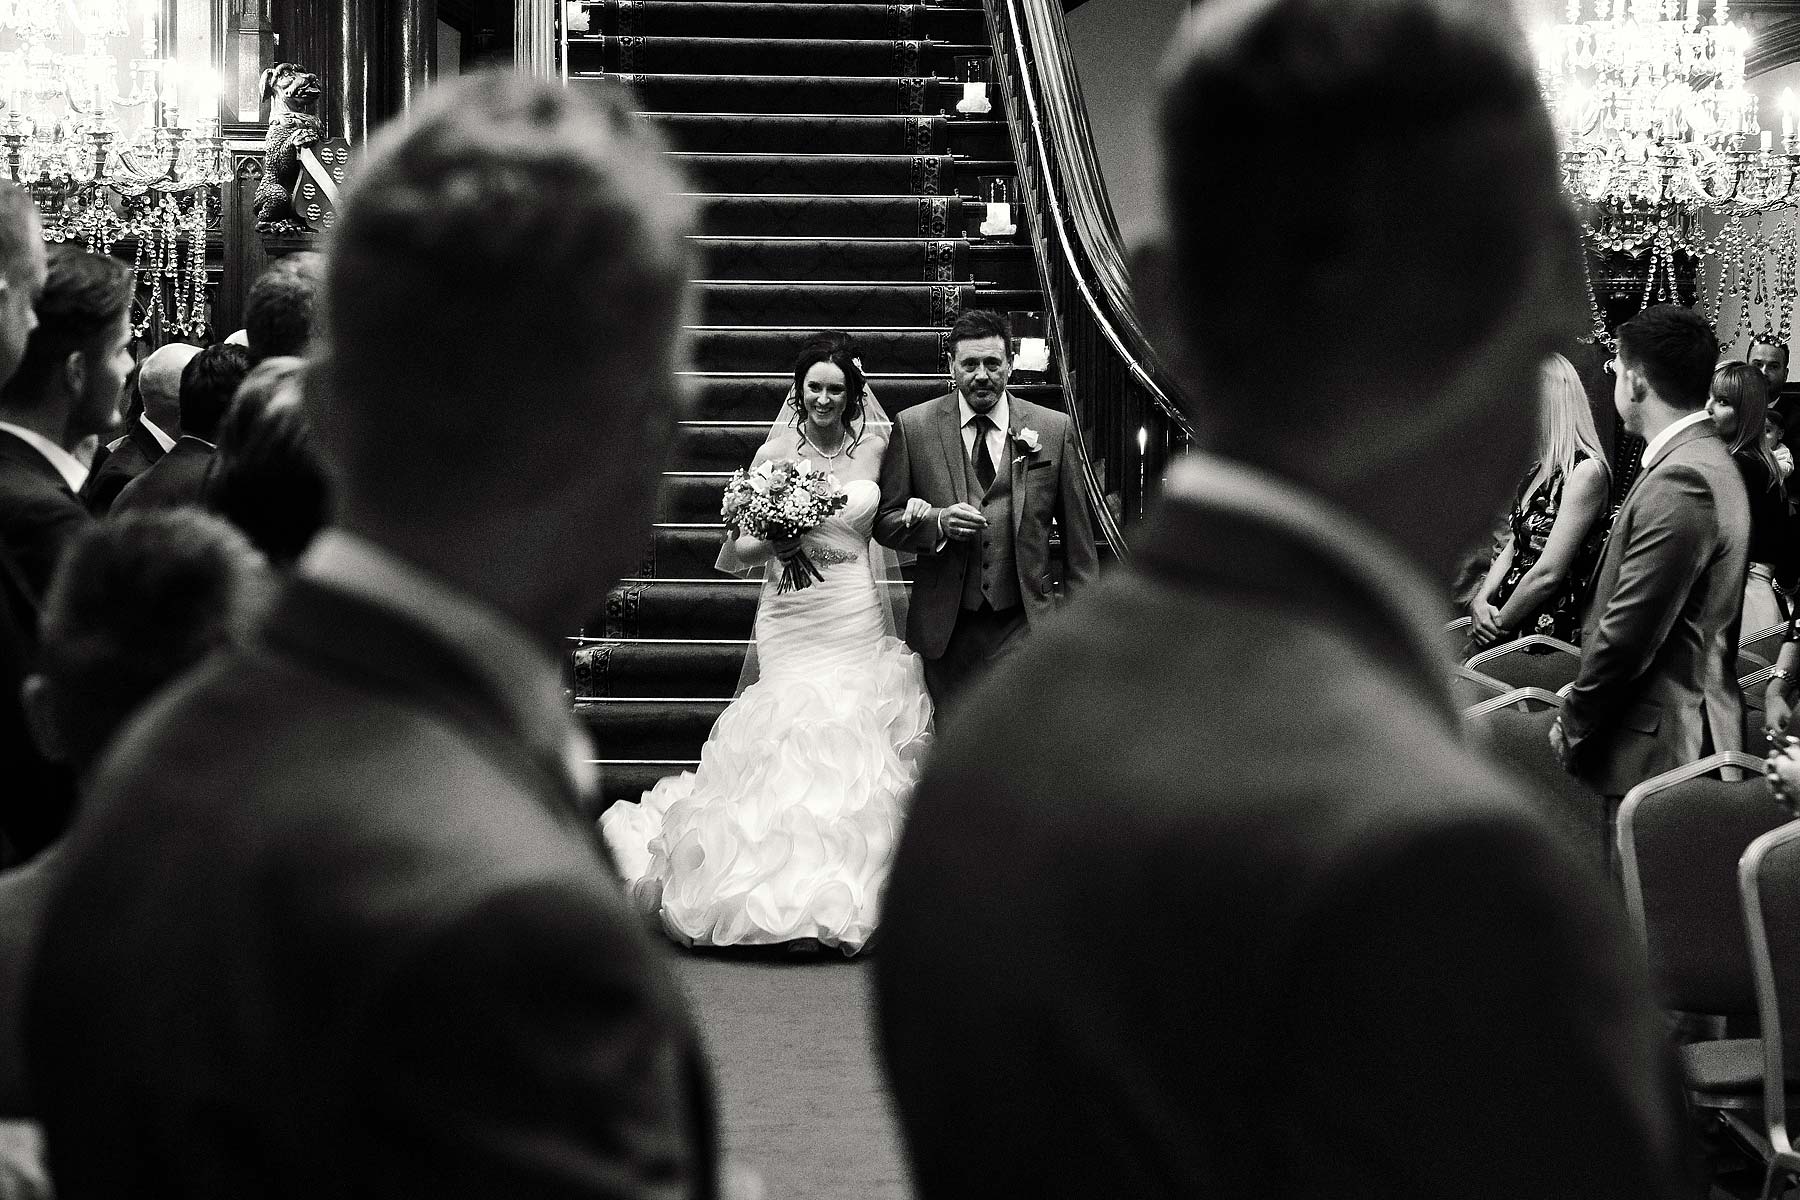 Capturing the truly stunning entrance of the bridal party for the wedding ceremony at Allerton Castle in Yorkshire by Documentary Wedding Photographer Stuart James